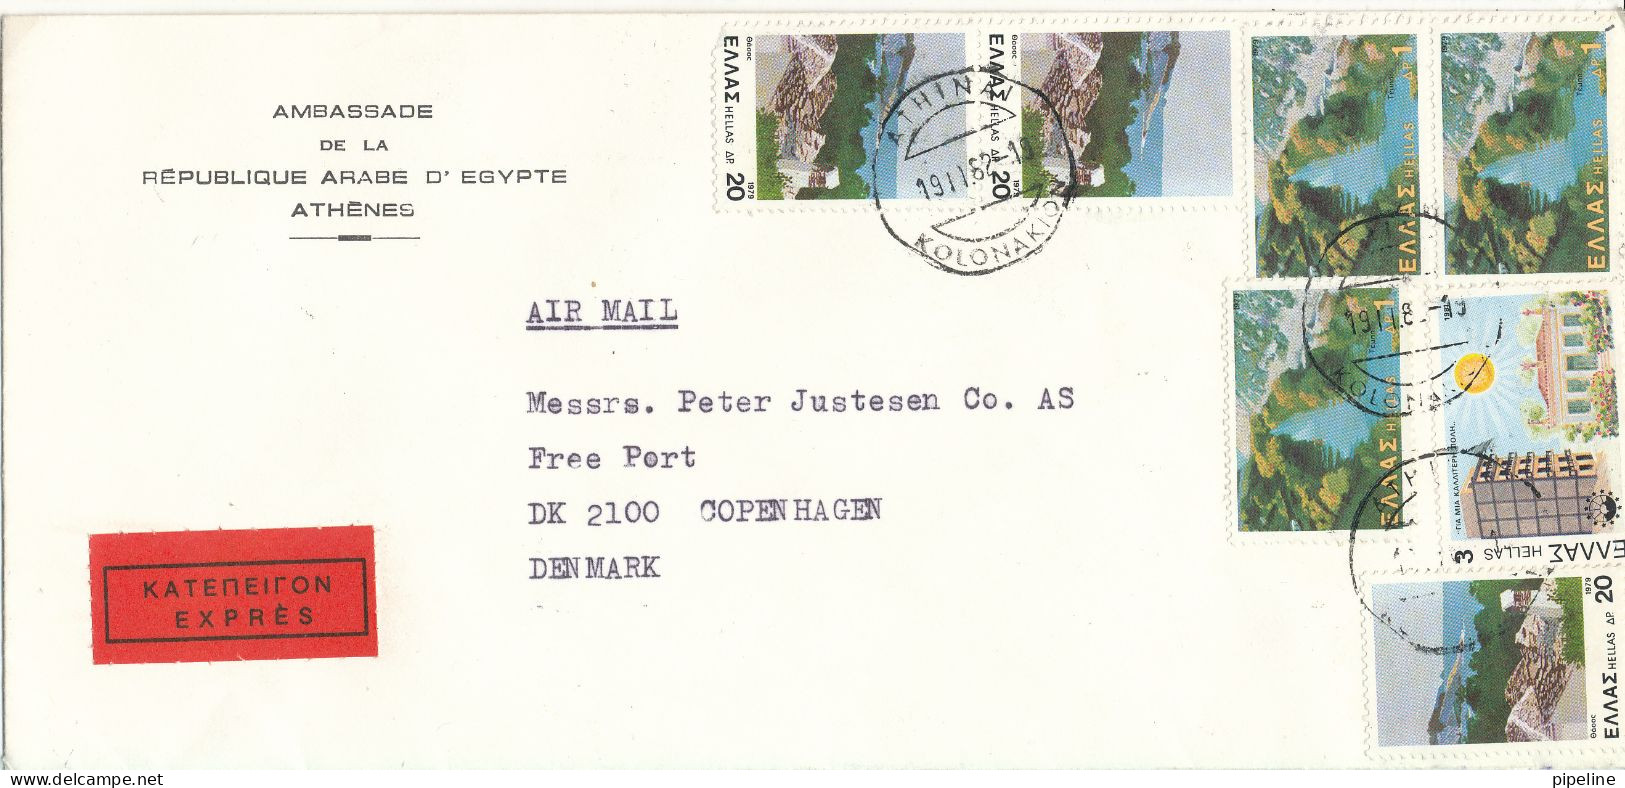 Greece Cover Sent Express To Denmark 19-2-1982 Topic Stamps (sent From The Embassy Of Egypt Athenes) - Covers & Documents